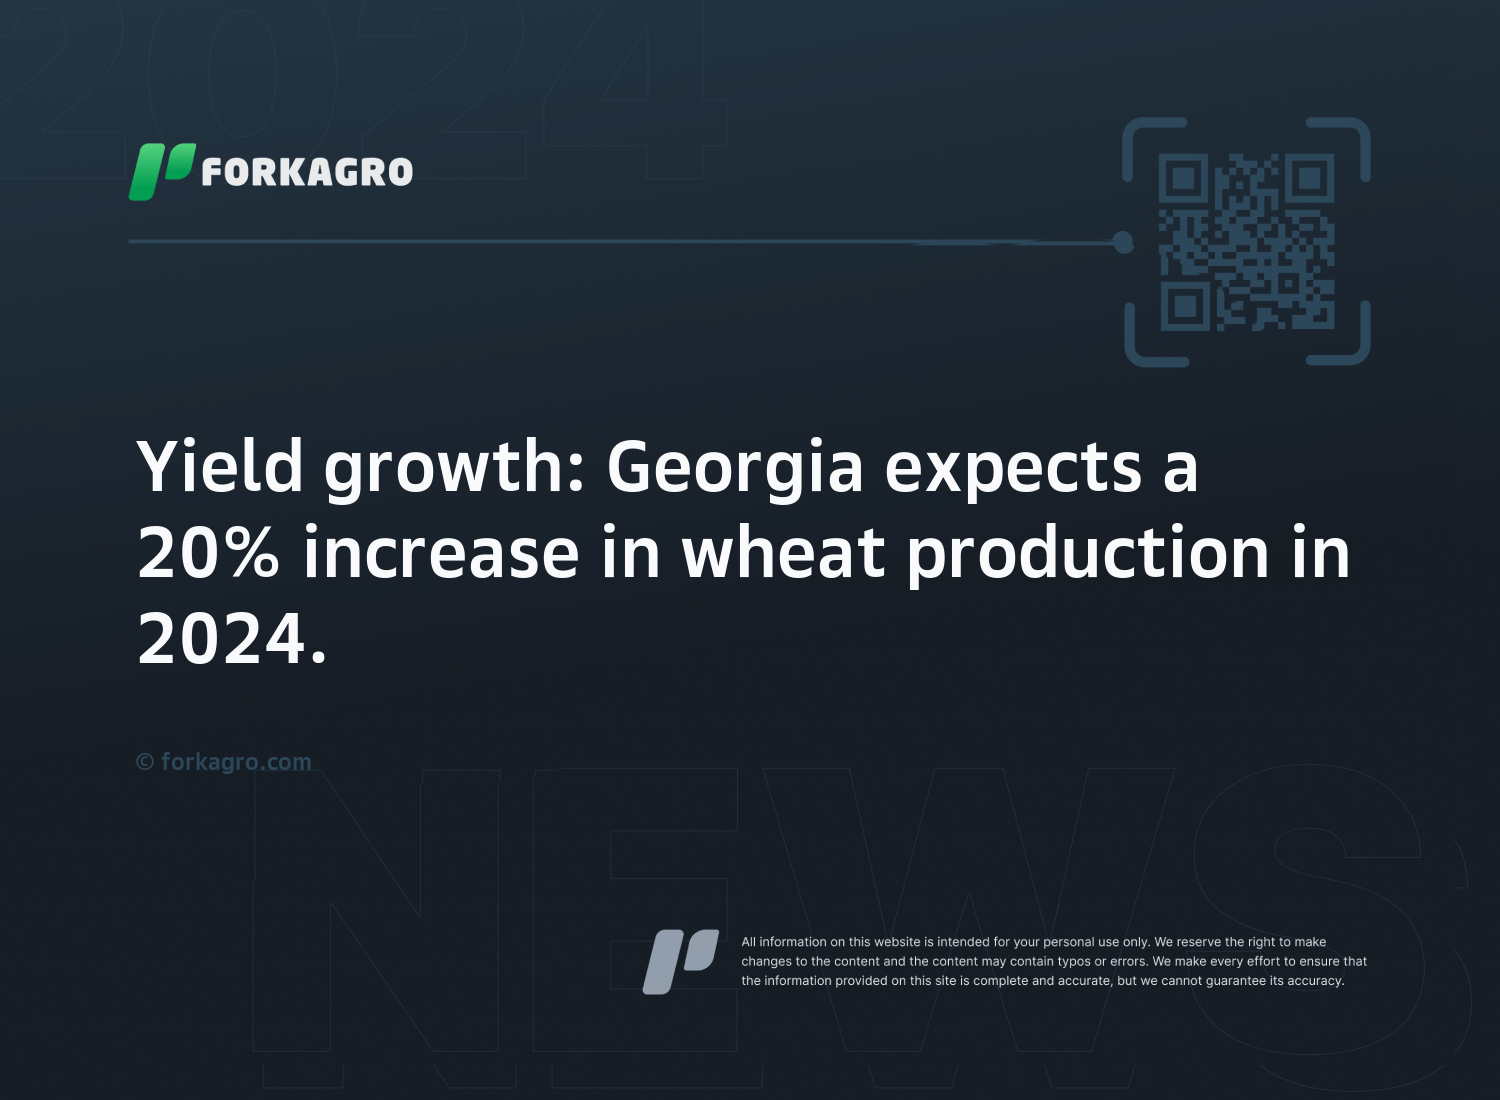 Yield growth: Georgia expects a 20% increase in wheat production in 2024.